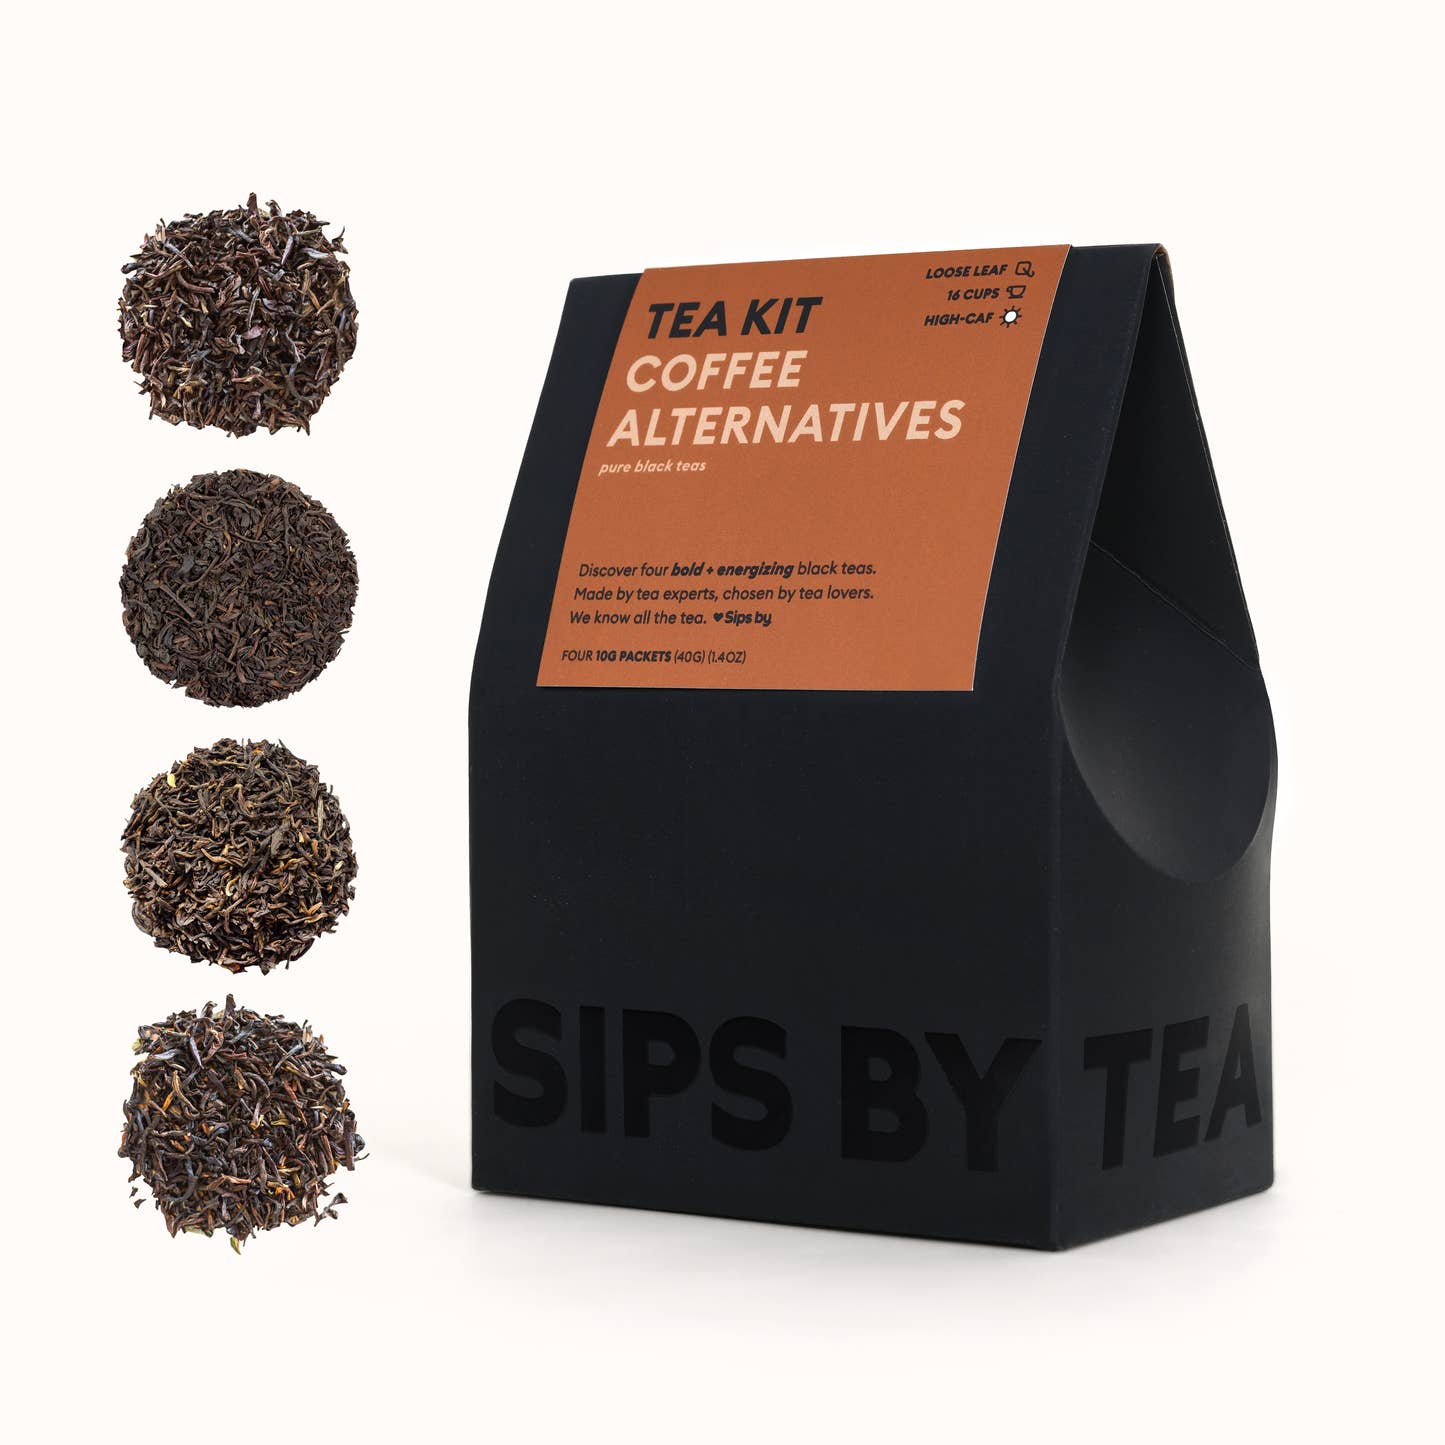 Black box with a brown topper that says "Coffee Alternatives Tea Kit - Made by tea experts, chosen by tea lovers. We know all the tea. Love Sips by. Makes 16 Cups. Four 10G Packets (40G) (1.4OZ)"